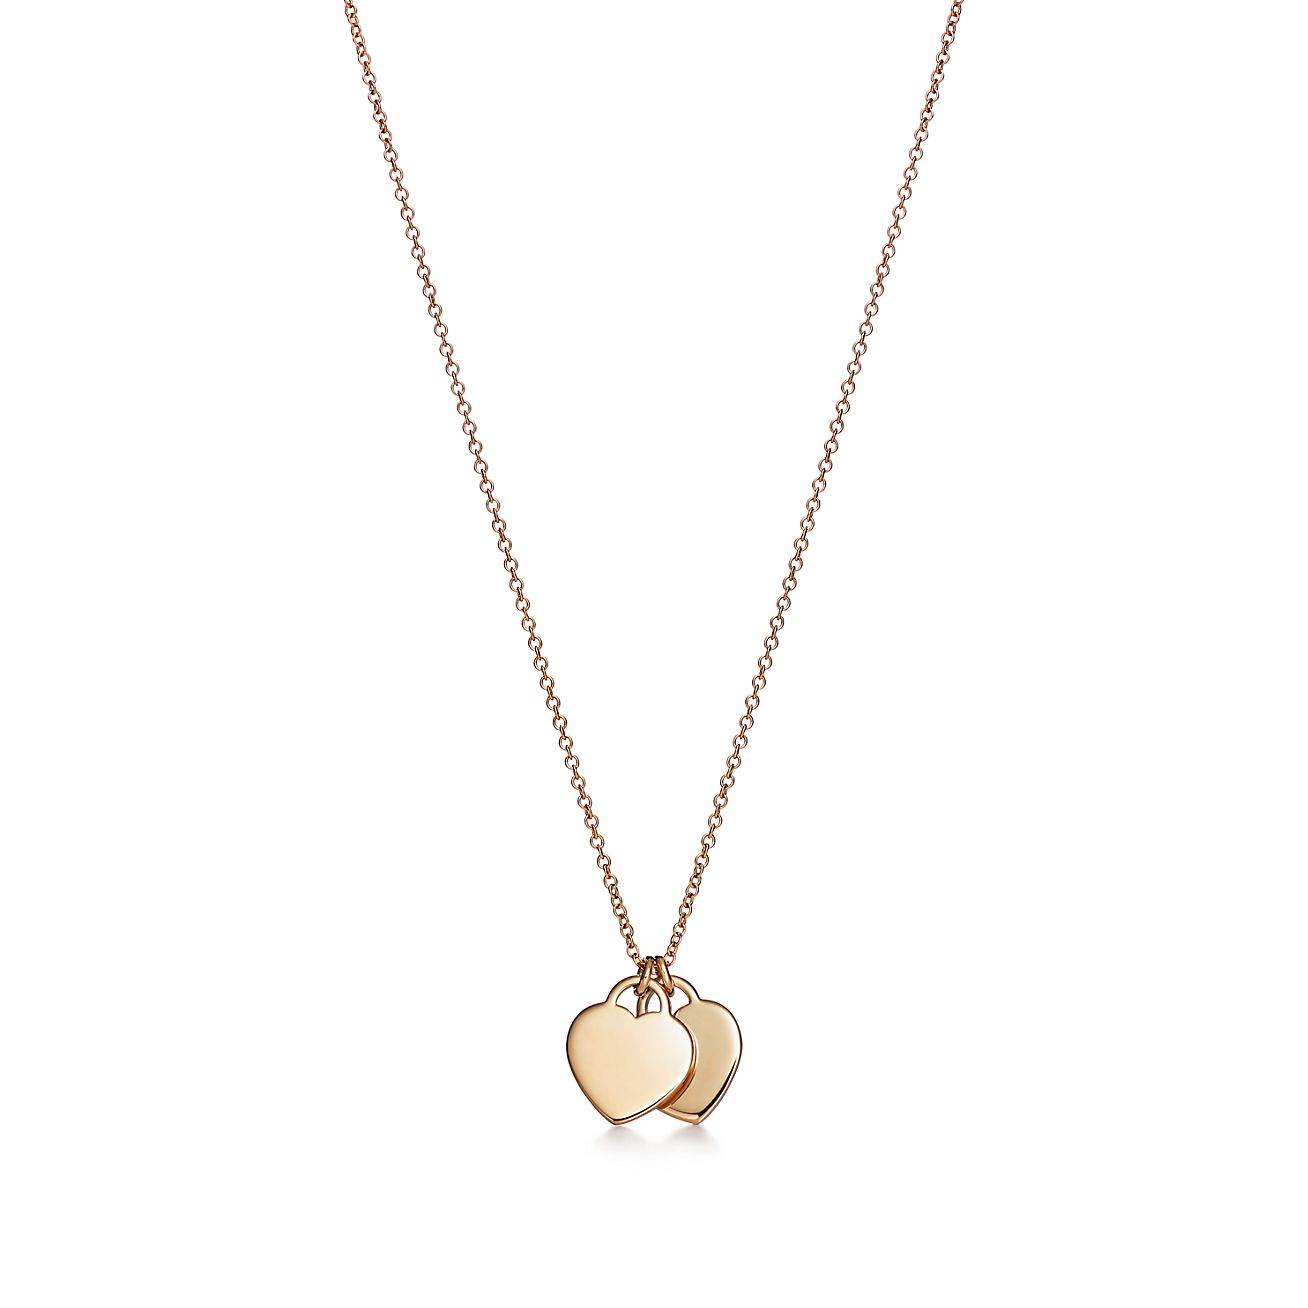 Double Heart Necklace, made of 925 sterling silver / 18k rose gold finish |  Charming Pendants